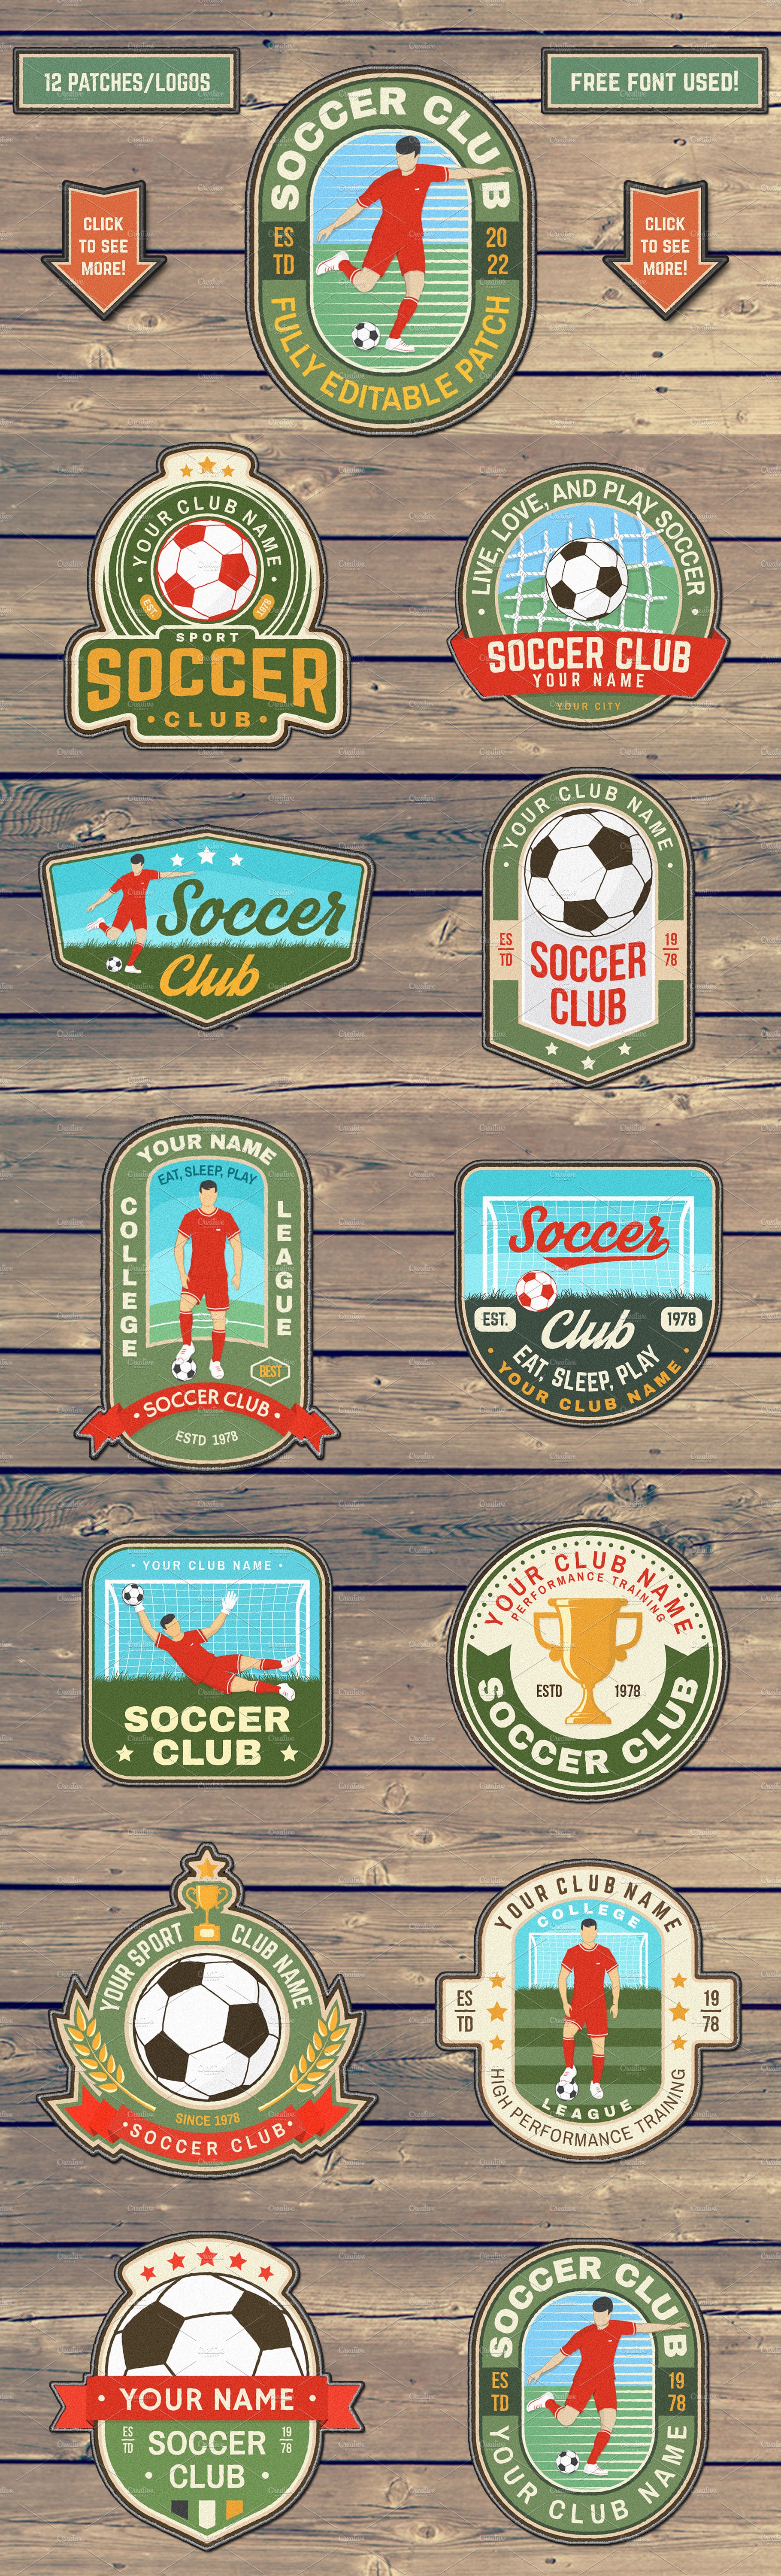 Soccer Club Patches/Logos preview image.